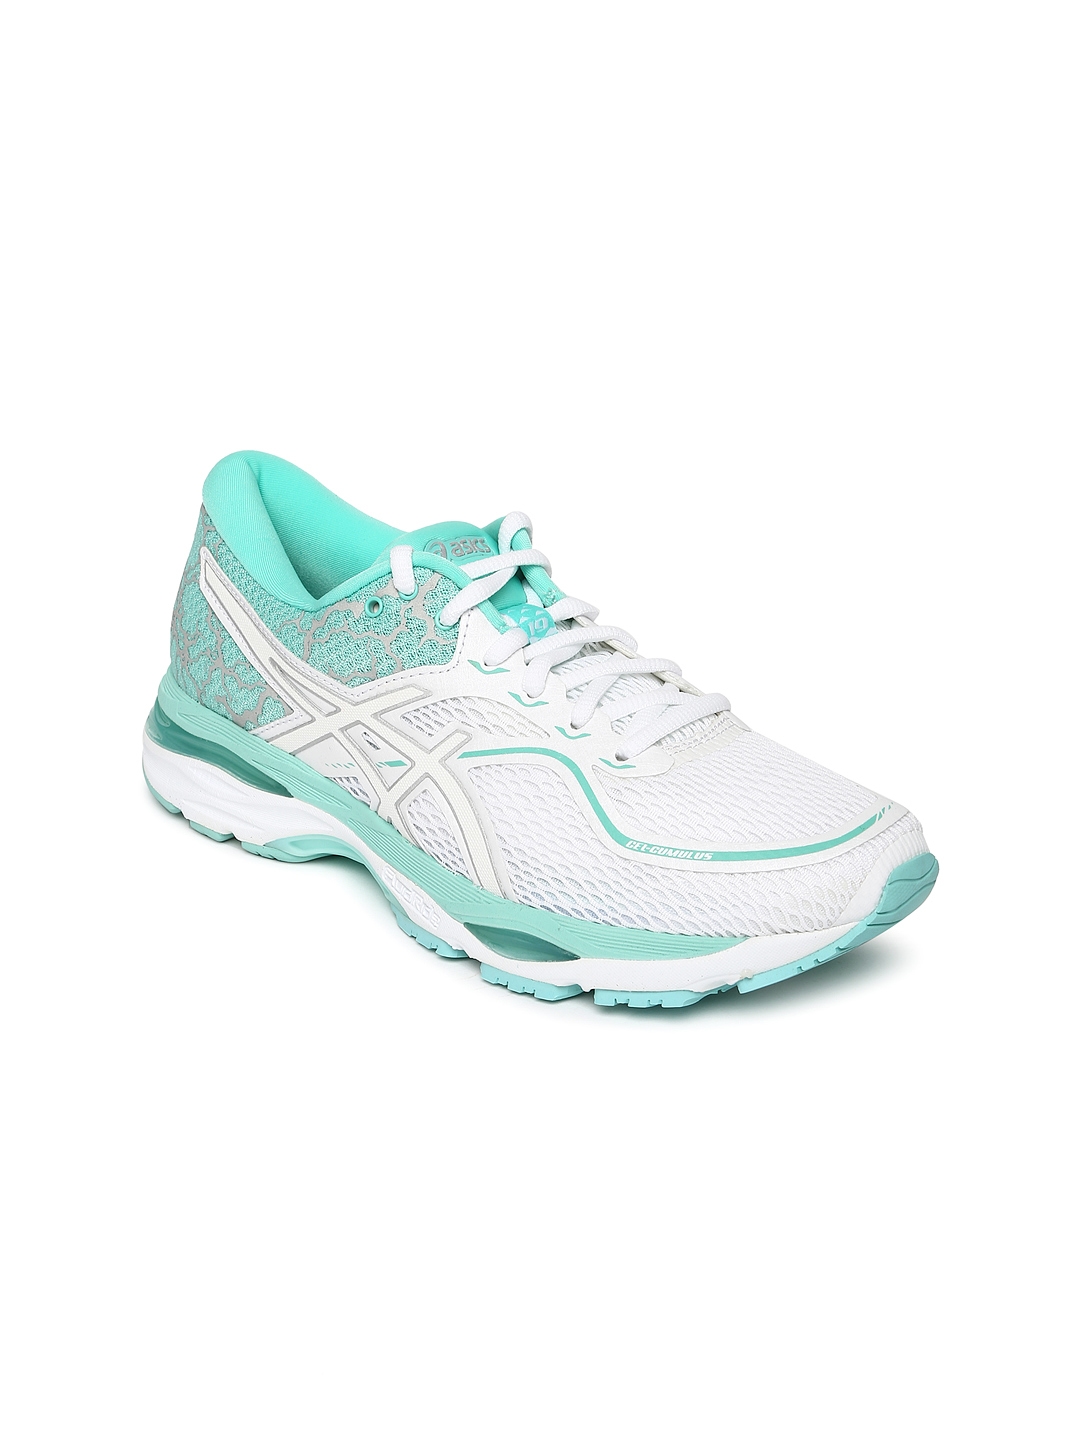 Secondly Potential burnt Buy ASICS Women White Running Shoes GEL CUMULUS 19 LITE SHOW - Sports Shoes  for Women 2505850 | Myntra